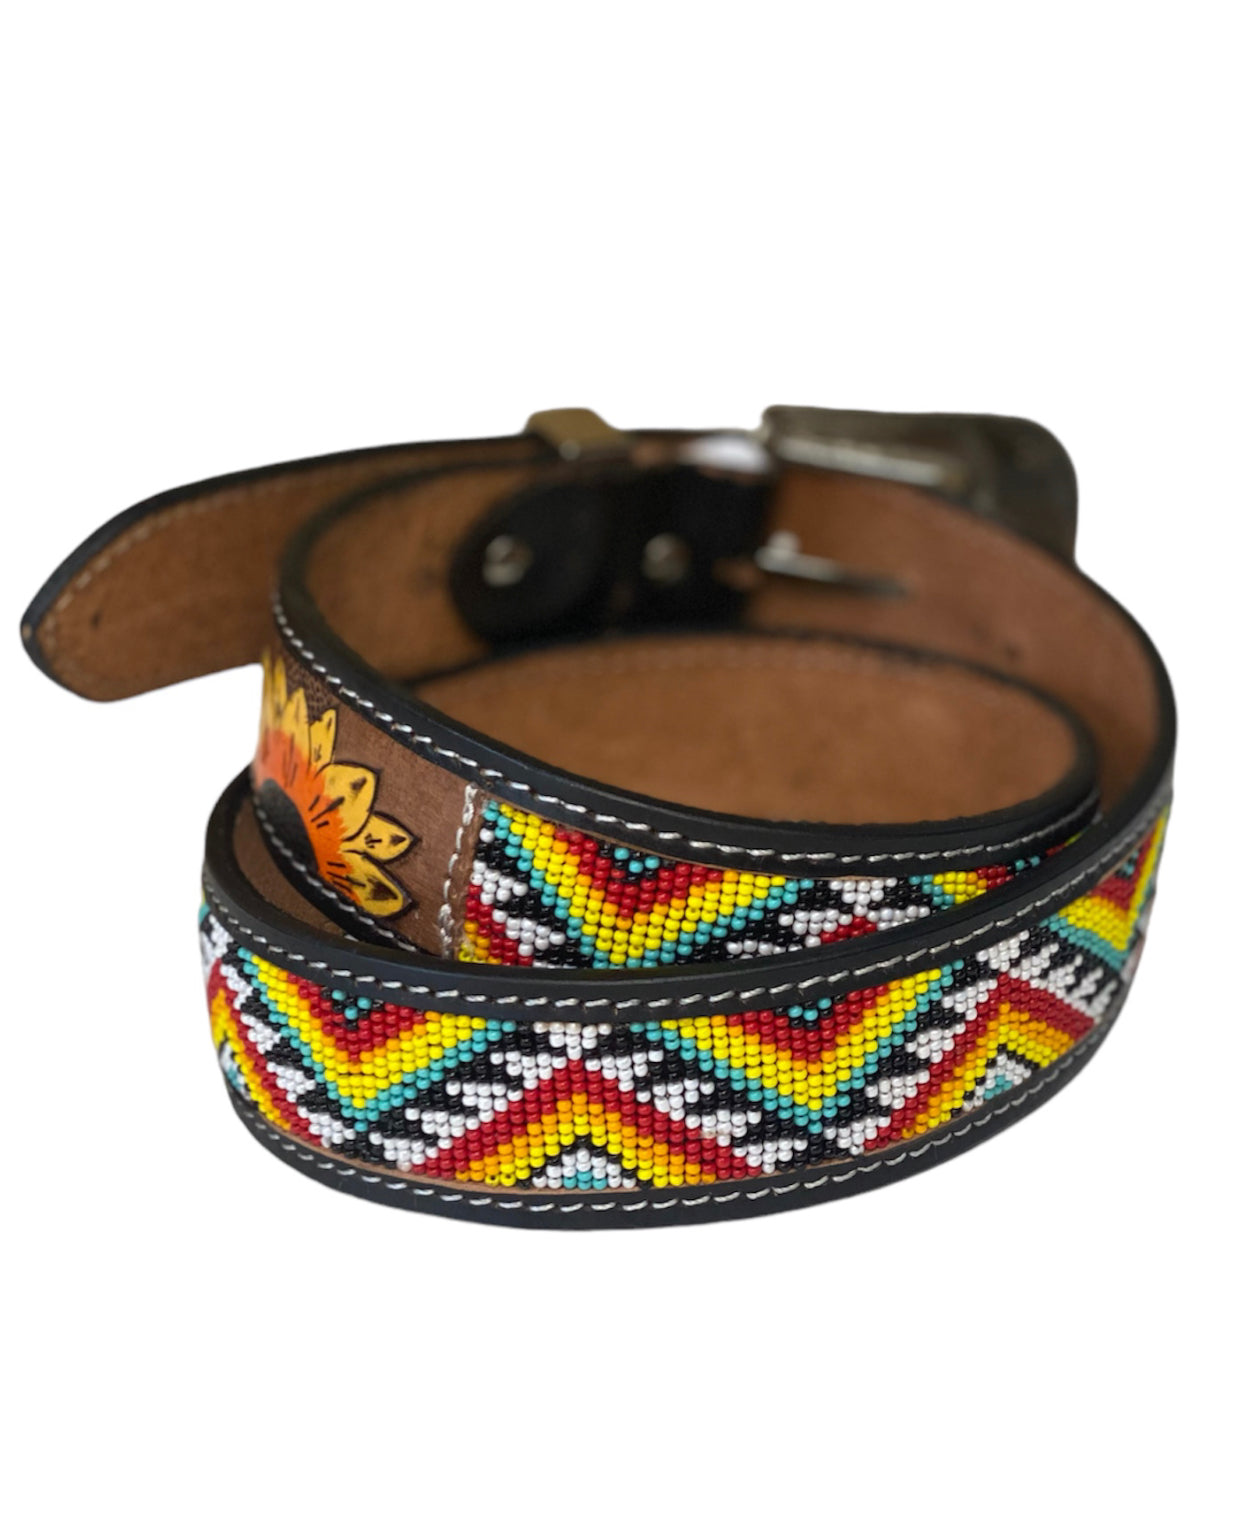 A8462 - Sunflower Leather Hand Carved Western Belt